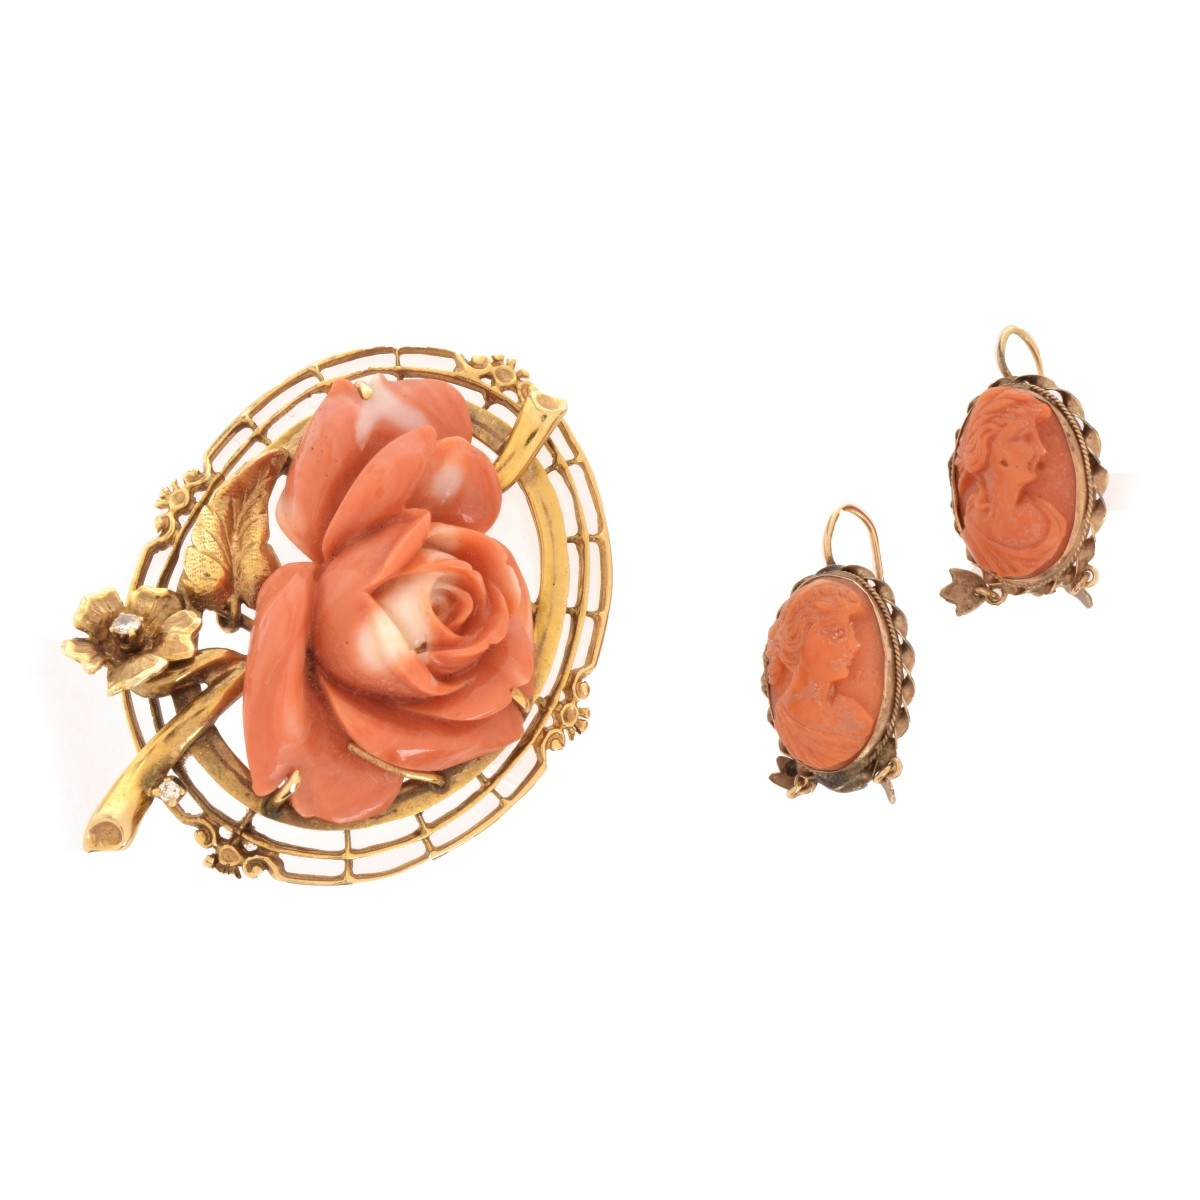 Coral and 14K Brooch and Earrings